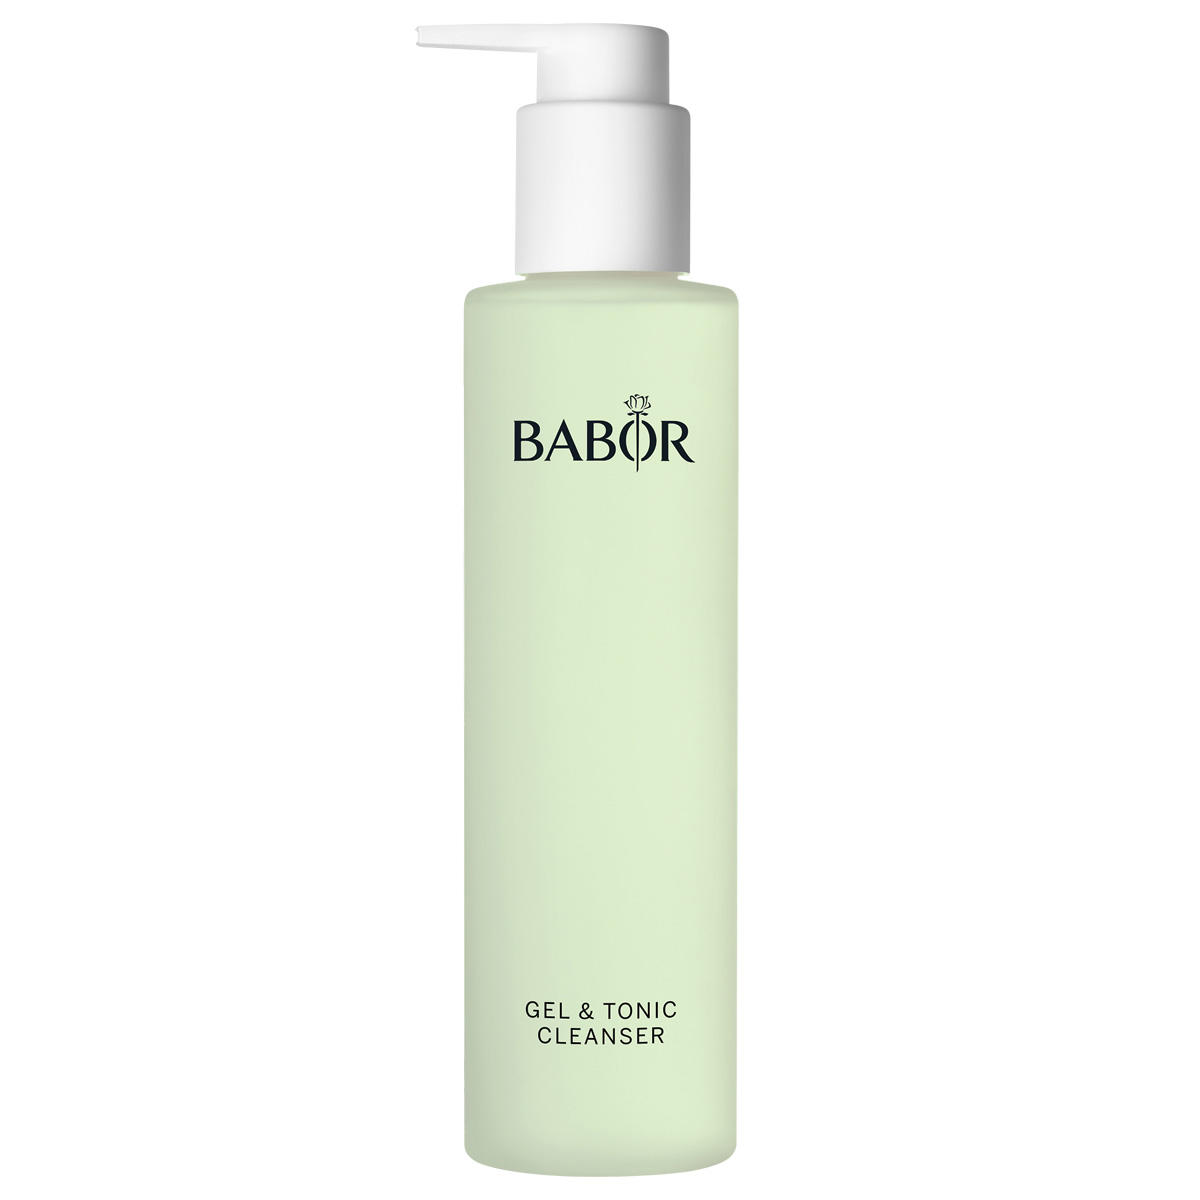 BABOR CLEANSING Gel & Tonic Cleanser 200 ml - 1